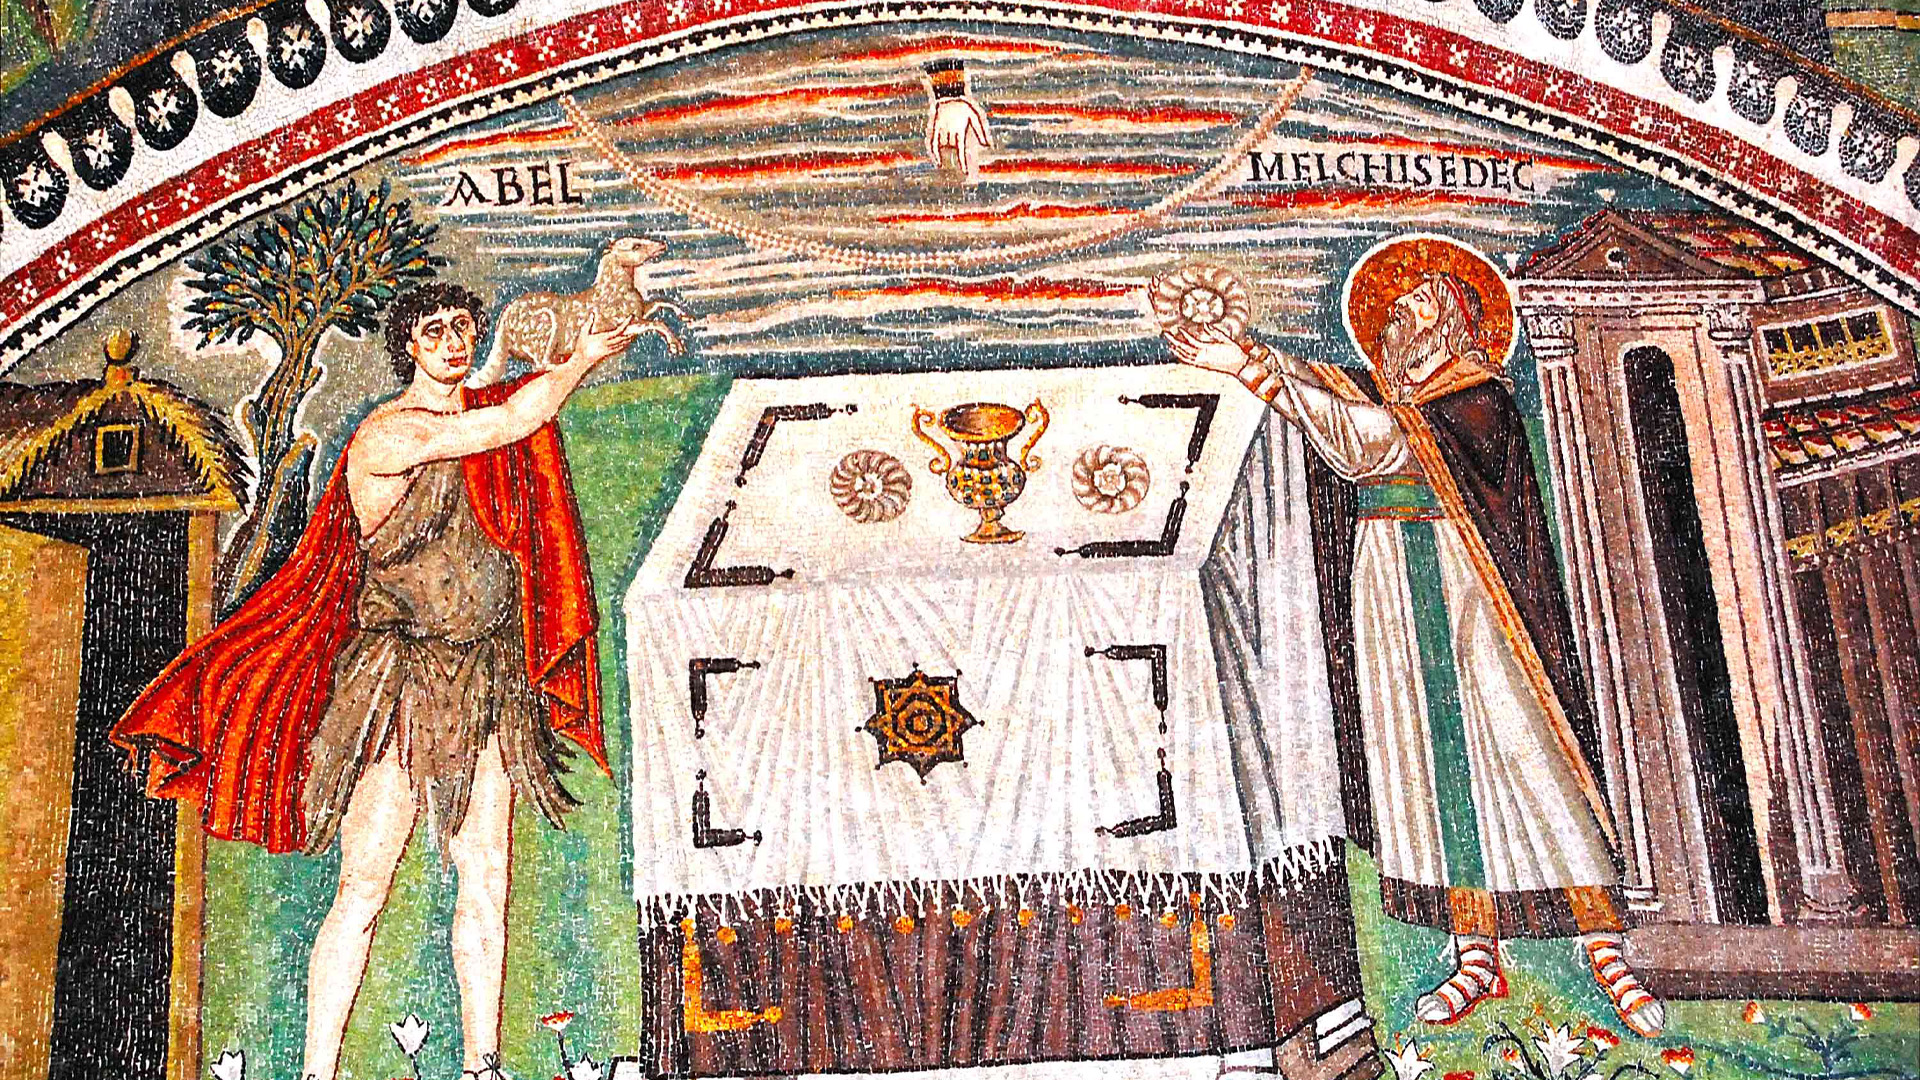 Abel and Melchizedek bringing their offerings to the altar. Mosaic in Basilica of St. Vitale, Ravenna. Image via templestudy.com